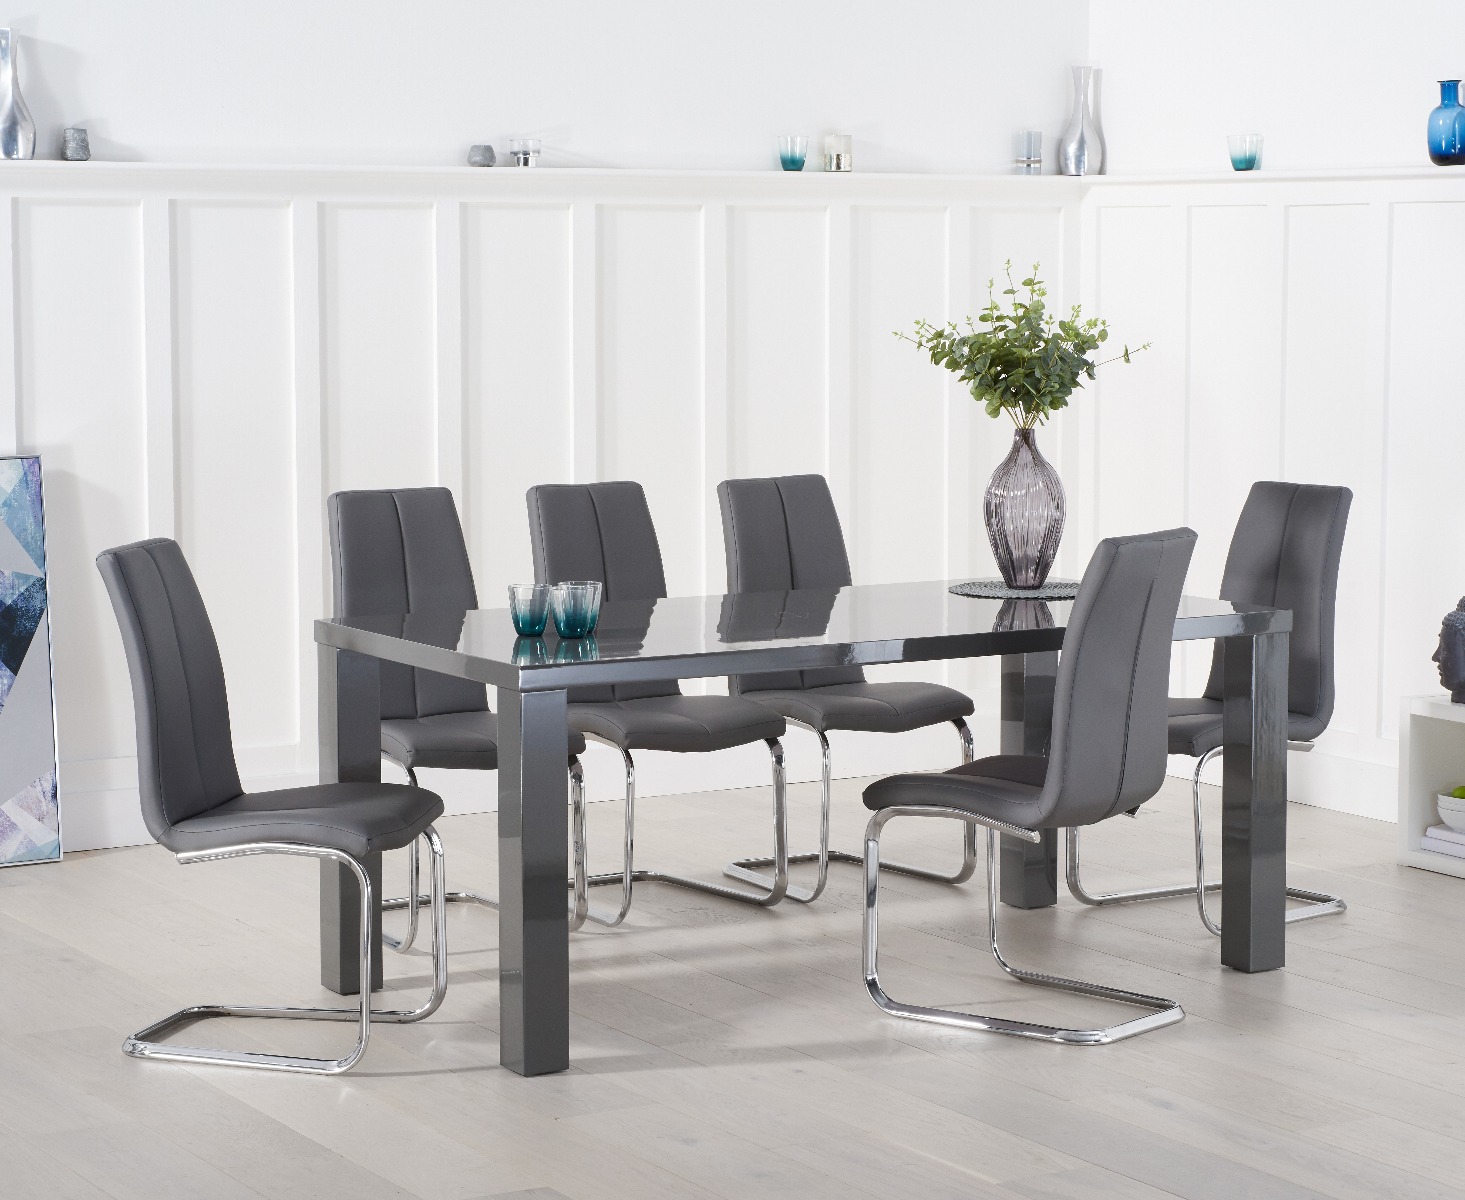 Photo 1 of Atlanta 200cm dark grey high gloss dining table with 10 grey gianni chairs